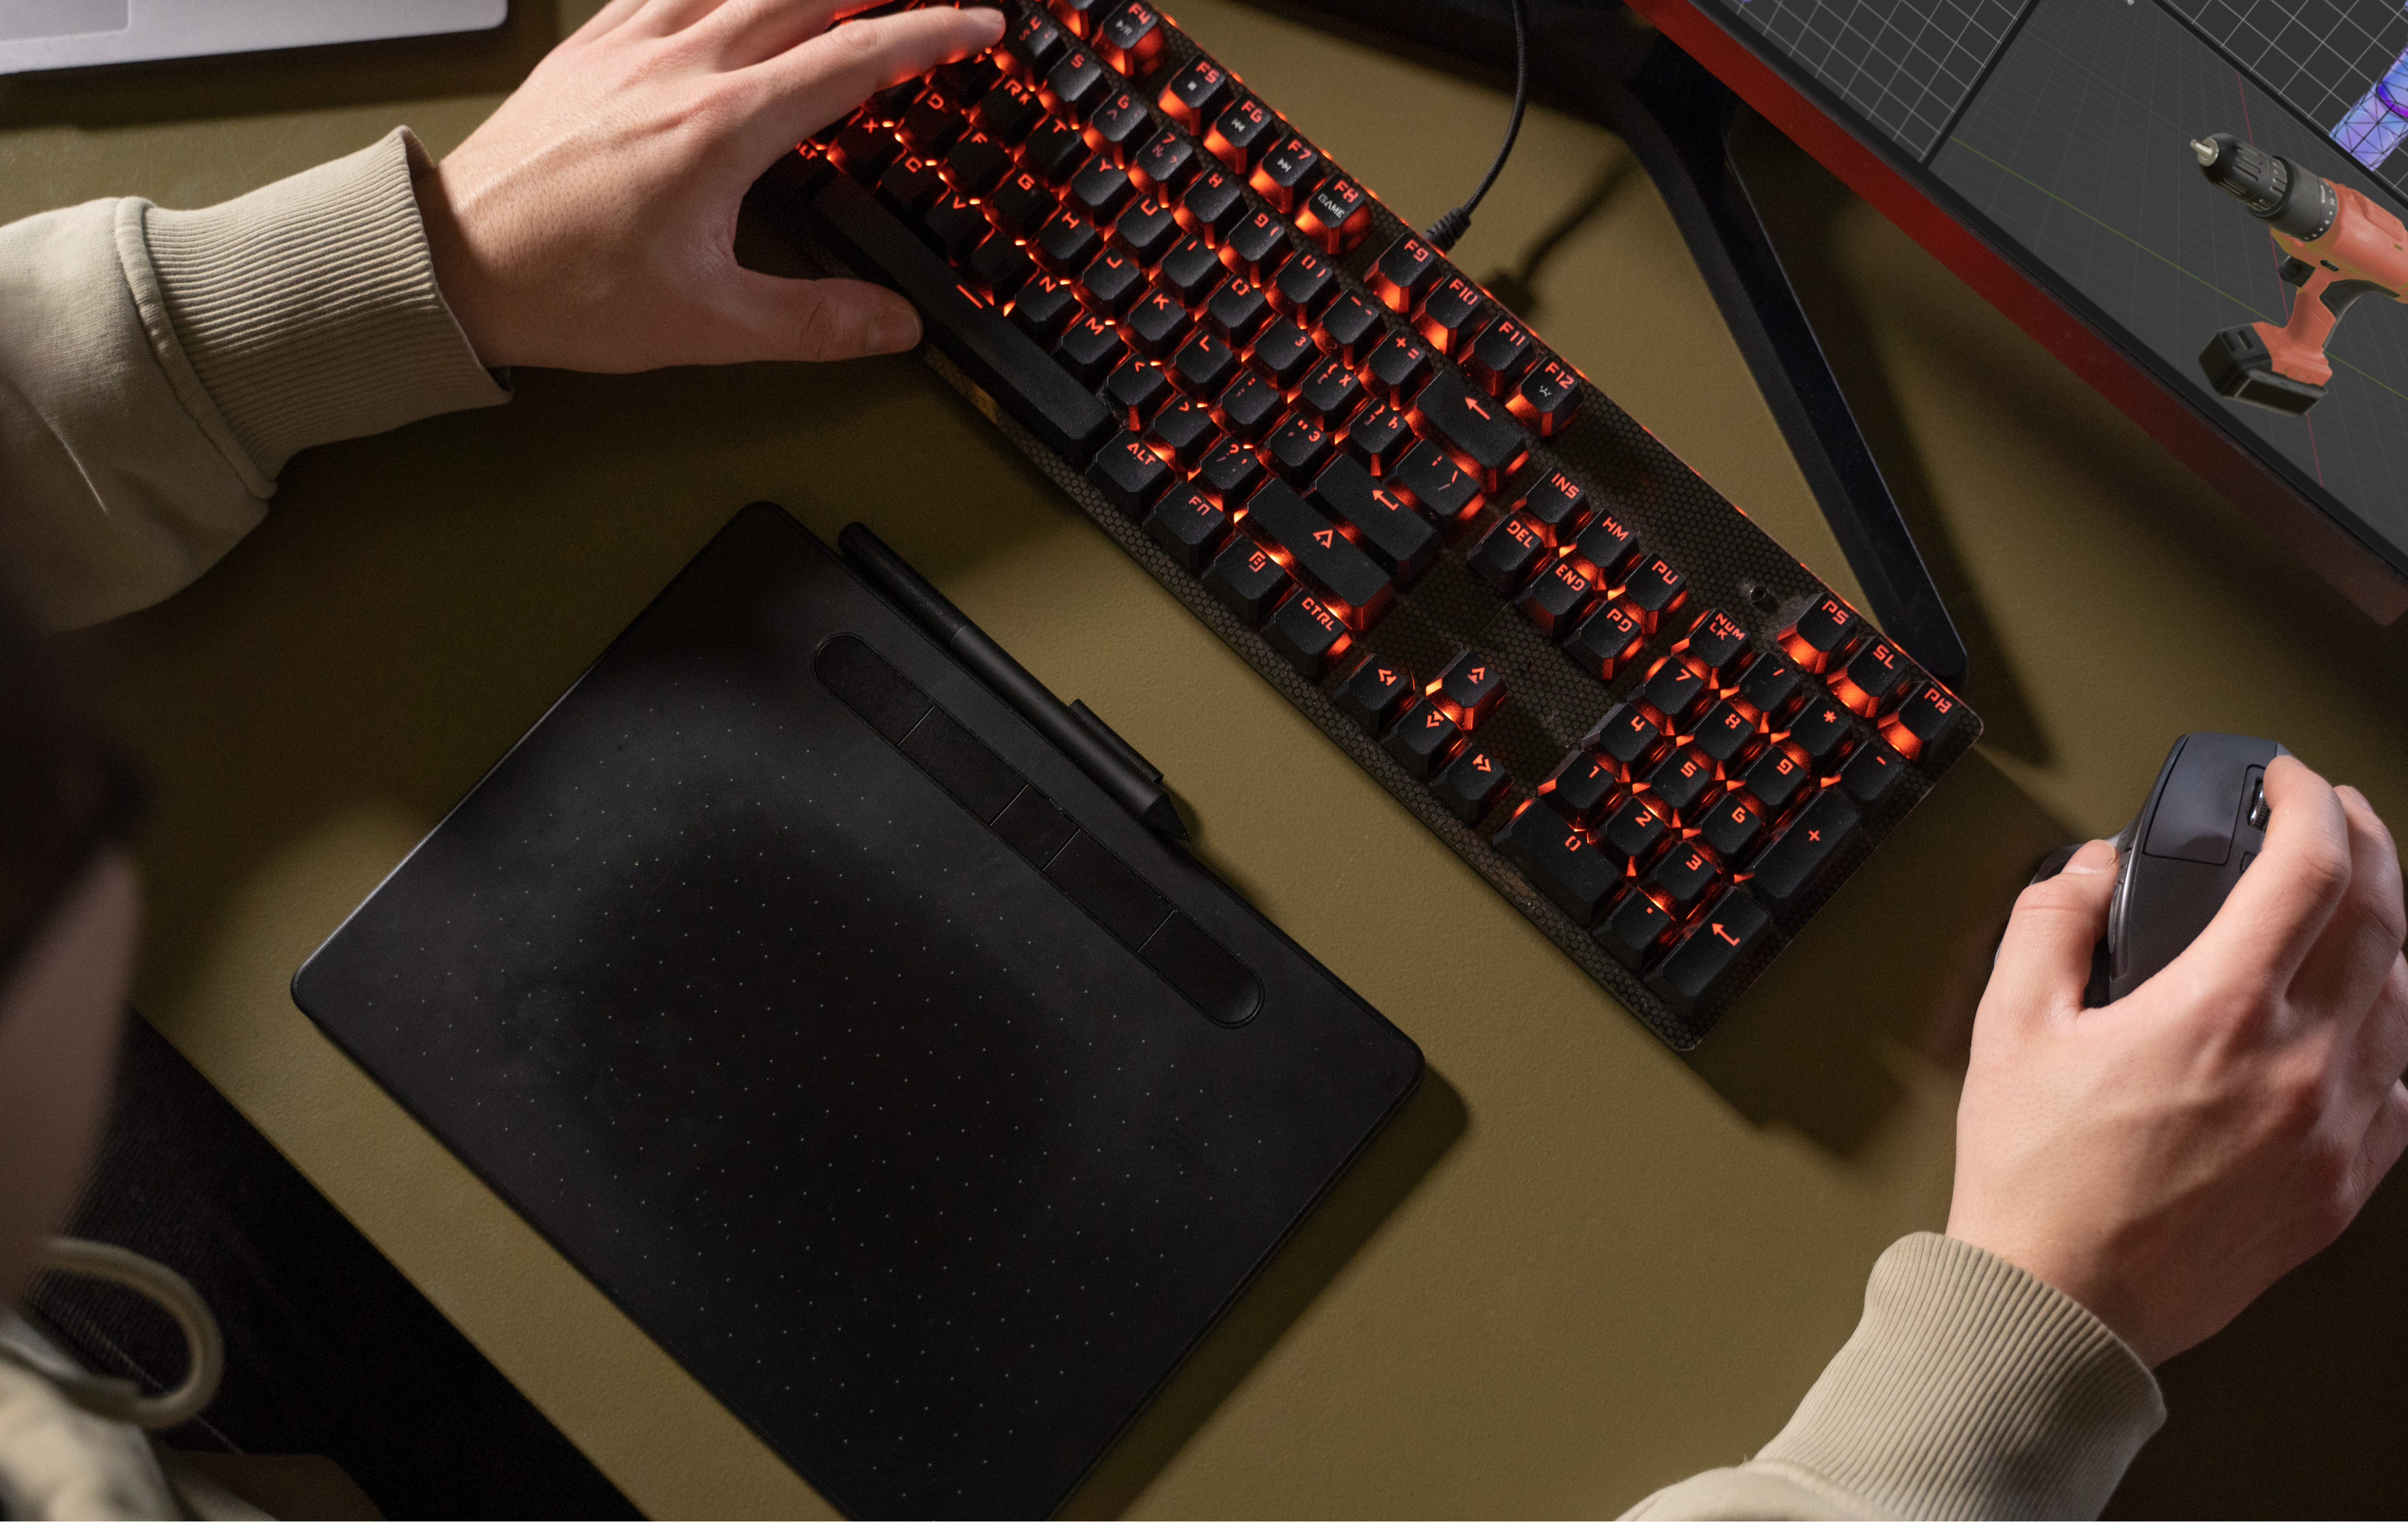 Best Keyboard and Mouse for Gaming (5 Top Picks)